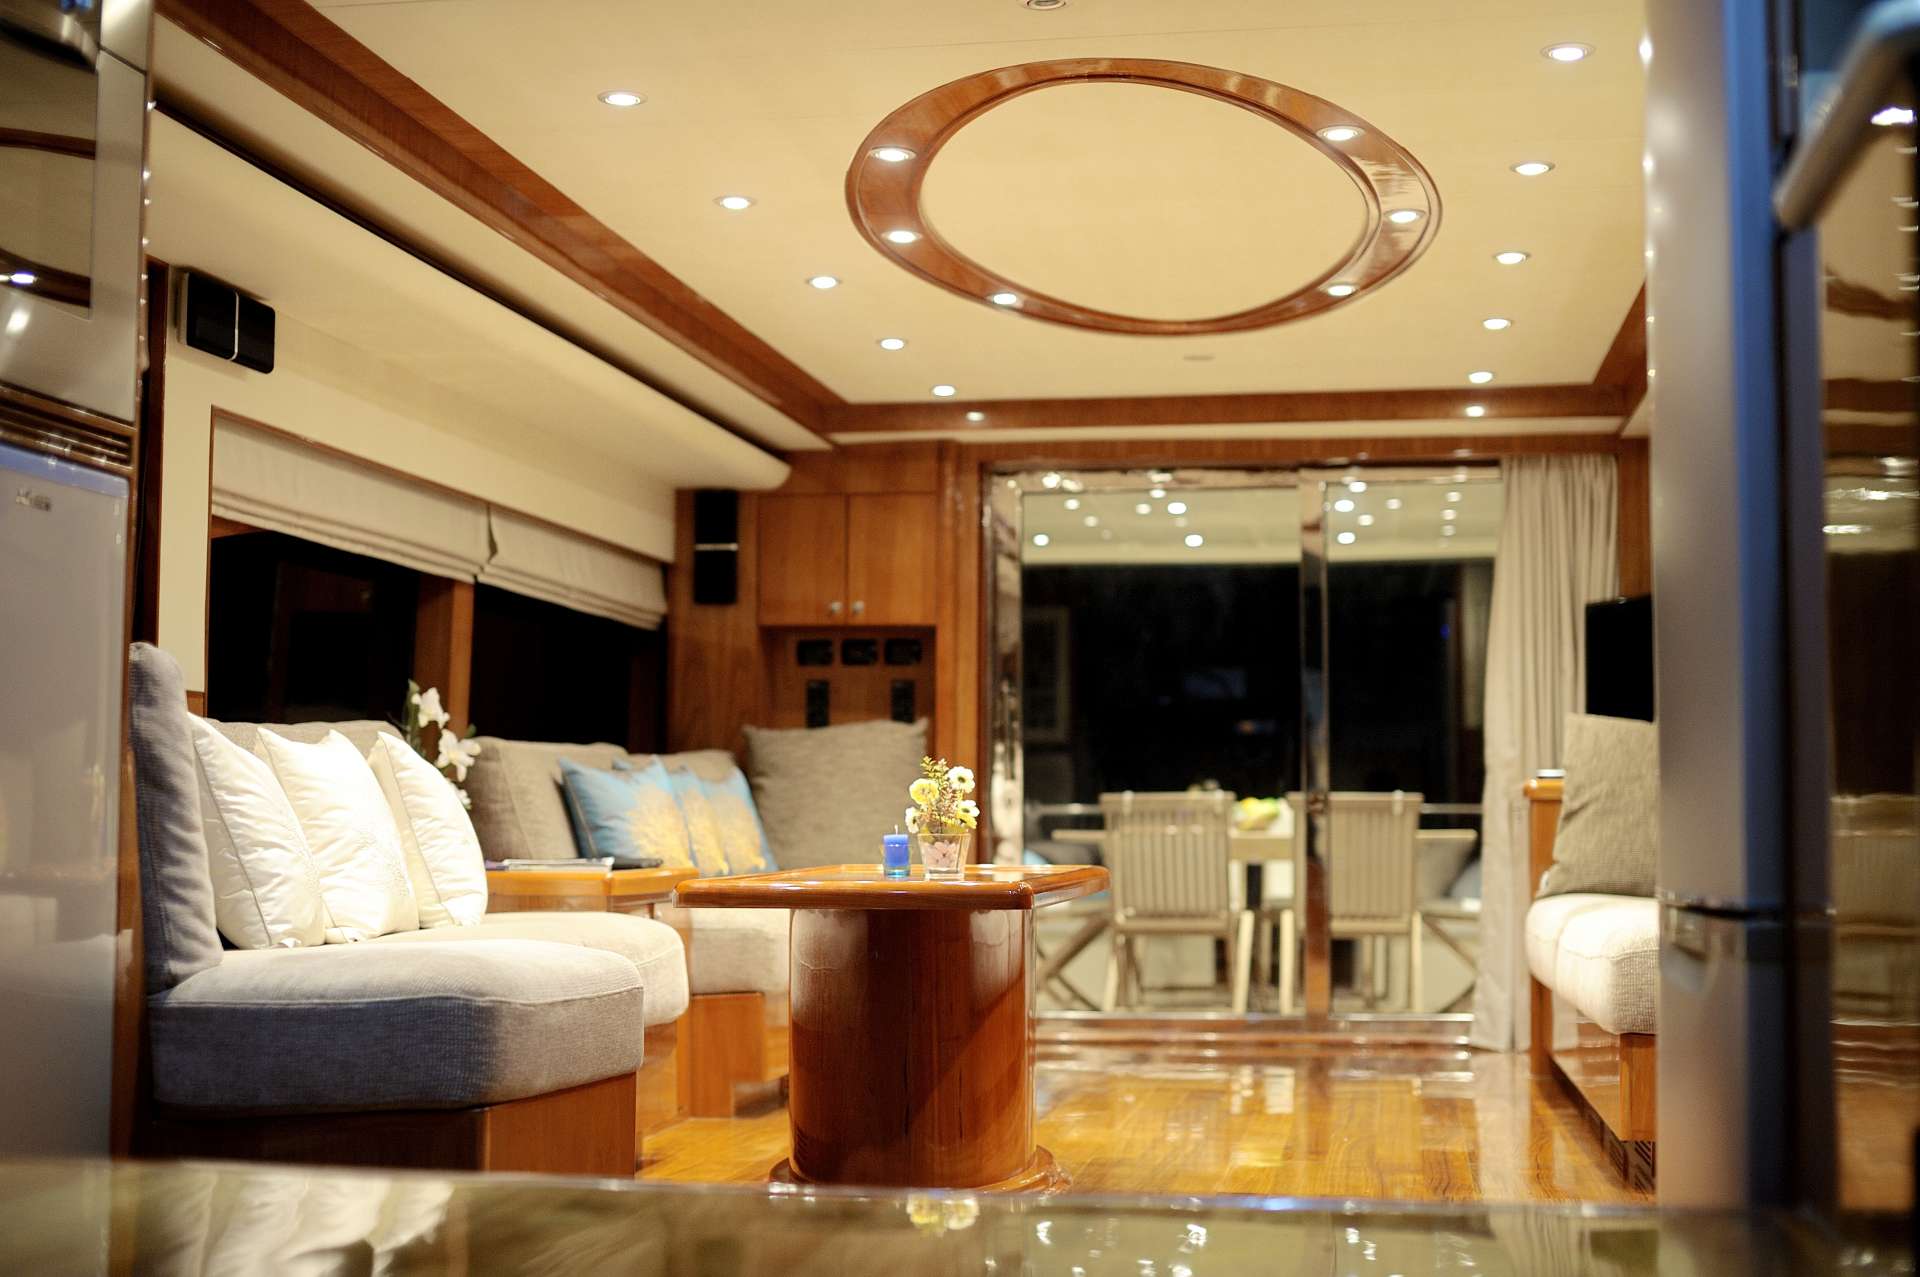 lady kathryn - Yacht Charter Koh Samui & Boat hire in SE Asia 2